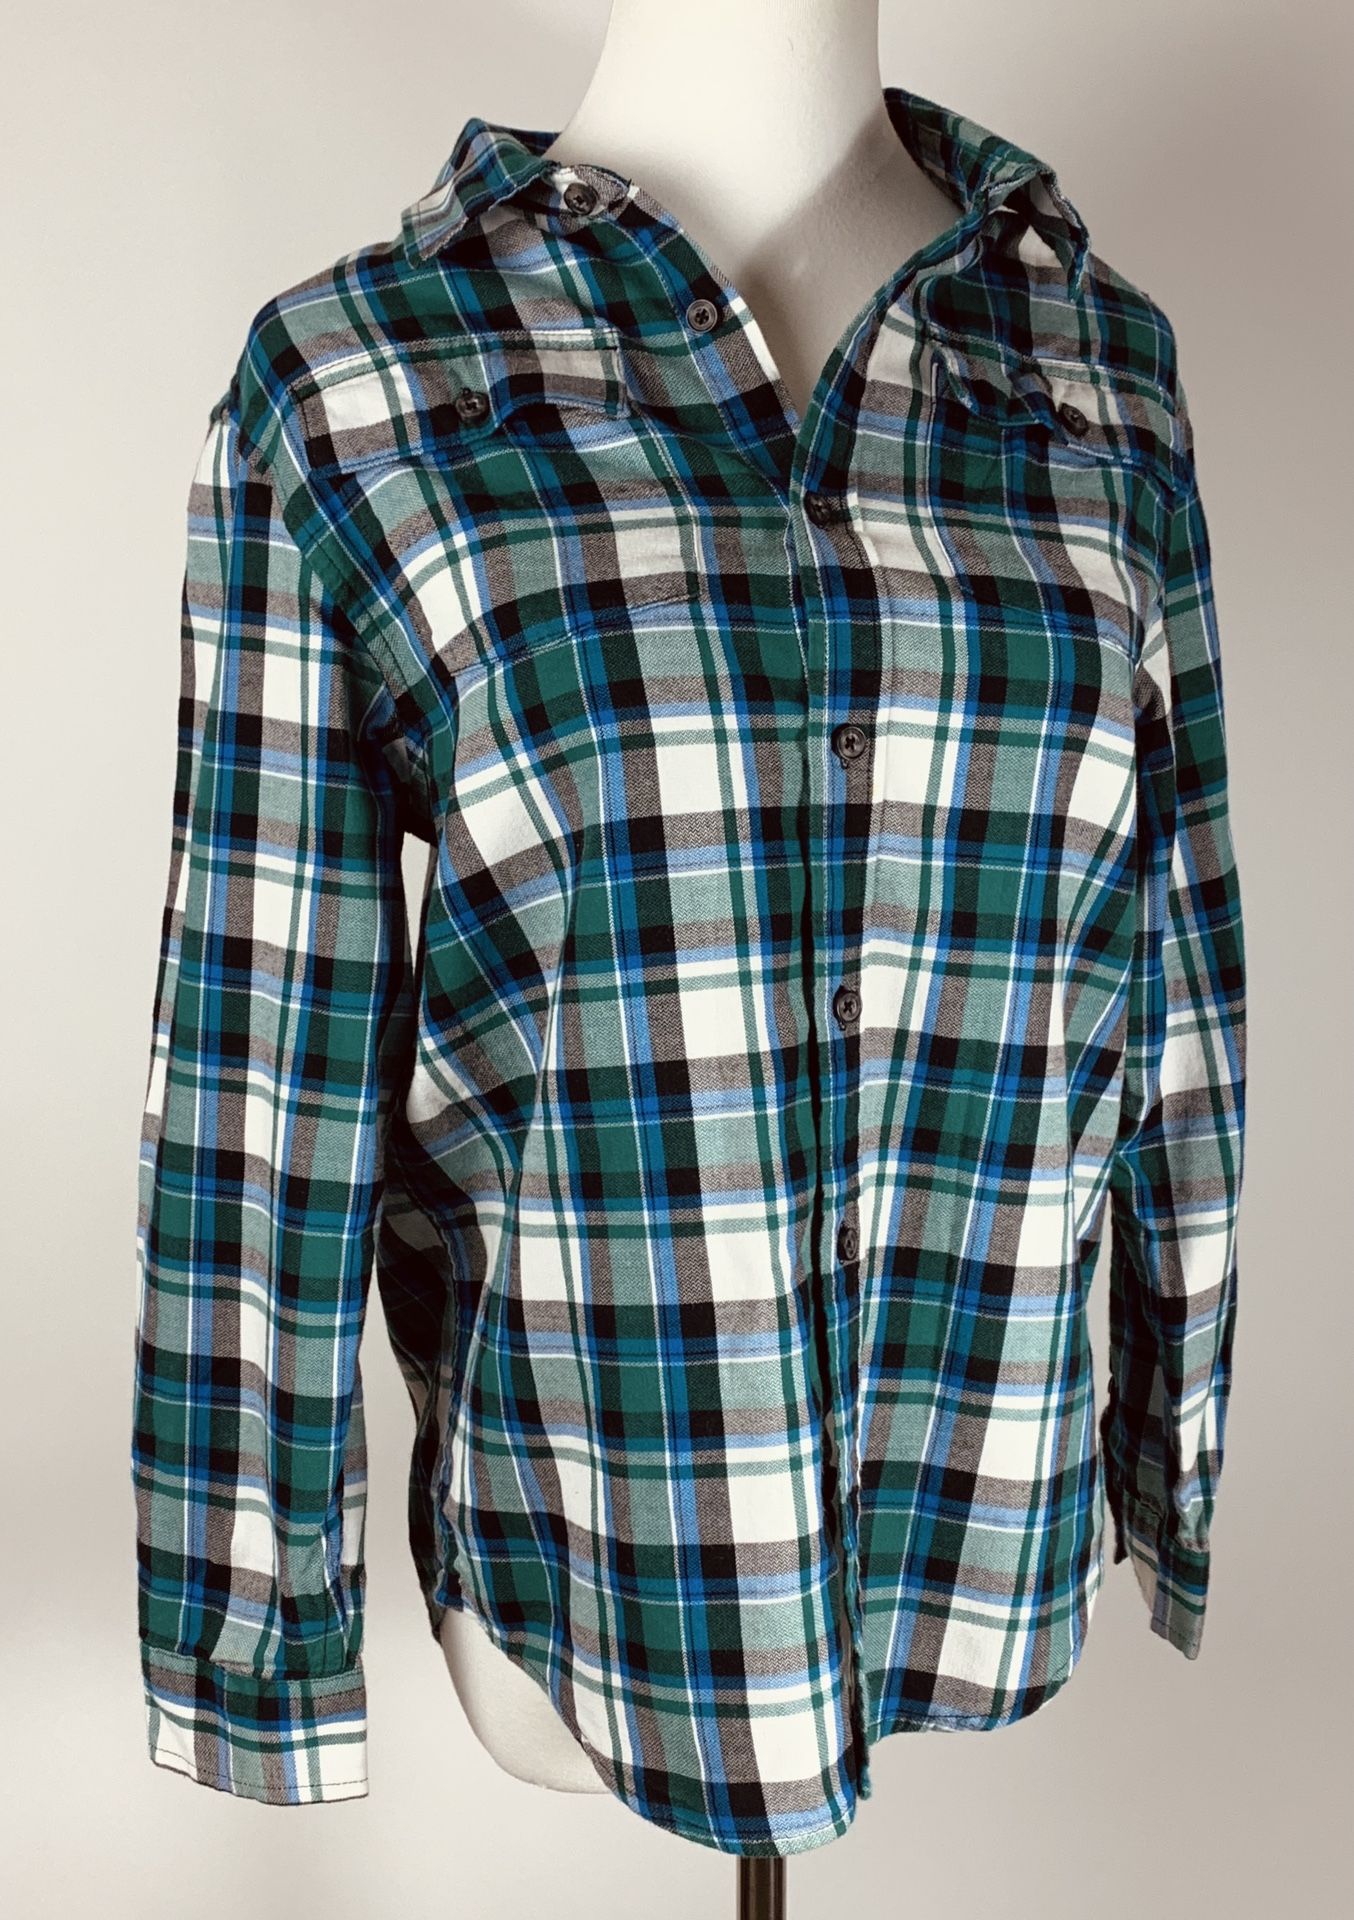 GYMBOREE Child Flannel Shirt.Size L 10-12. Green/Navy/White. Plaid with two pockets, Button up.